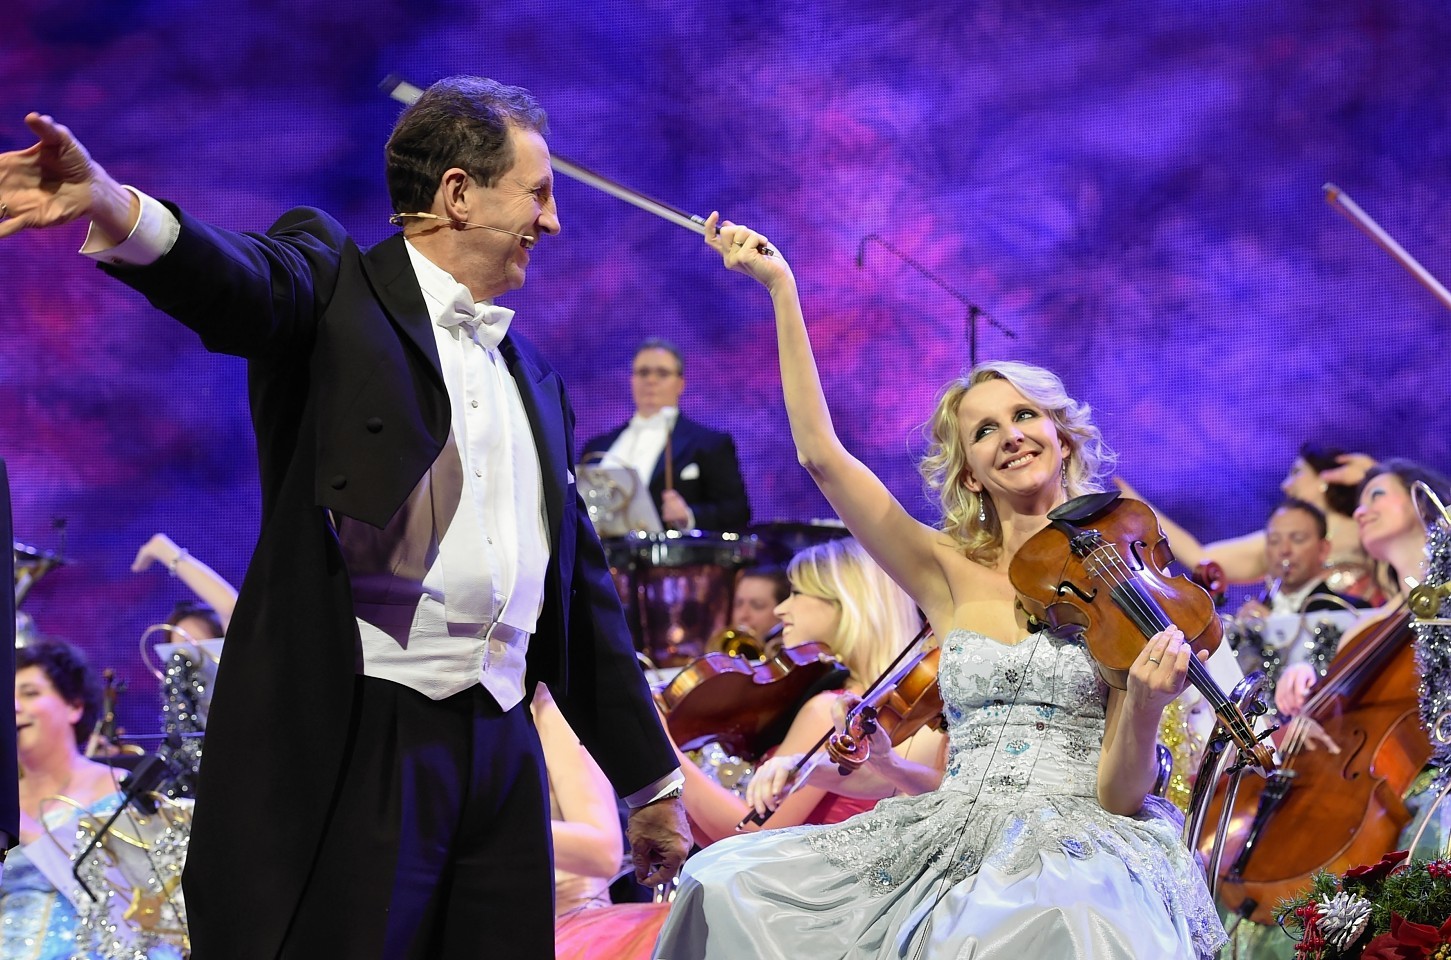 Rieu and his team have become known for their melodramatic stage performances. Picture by Colin Rennie